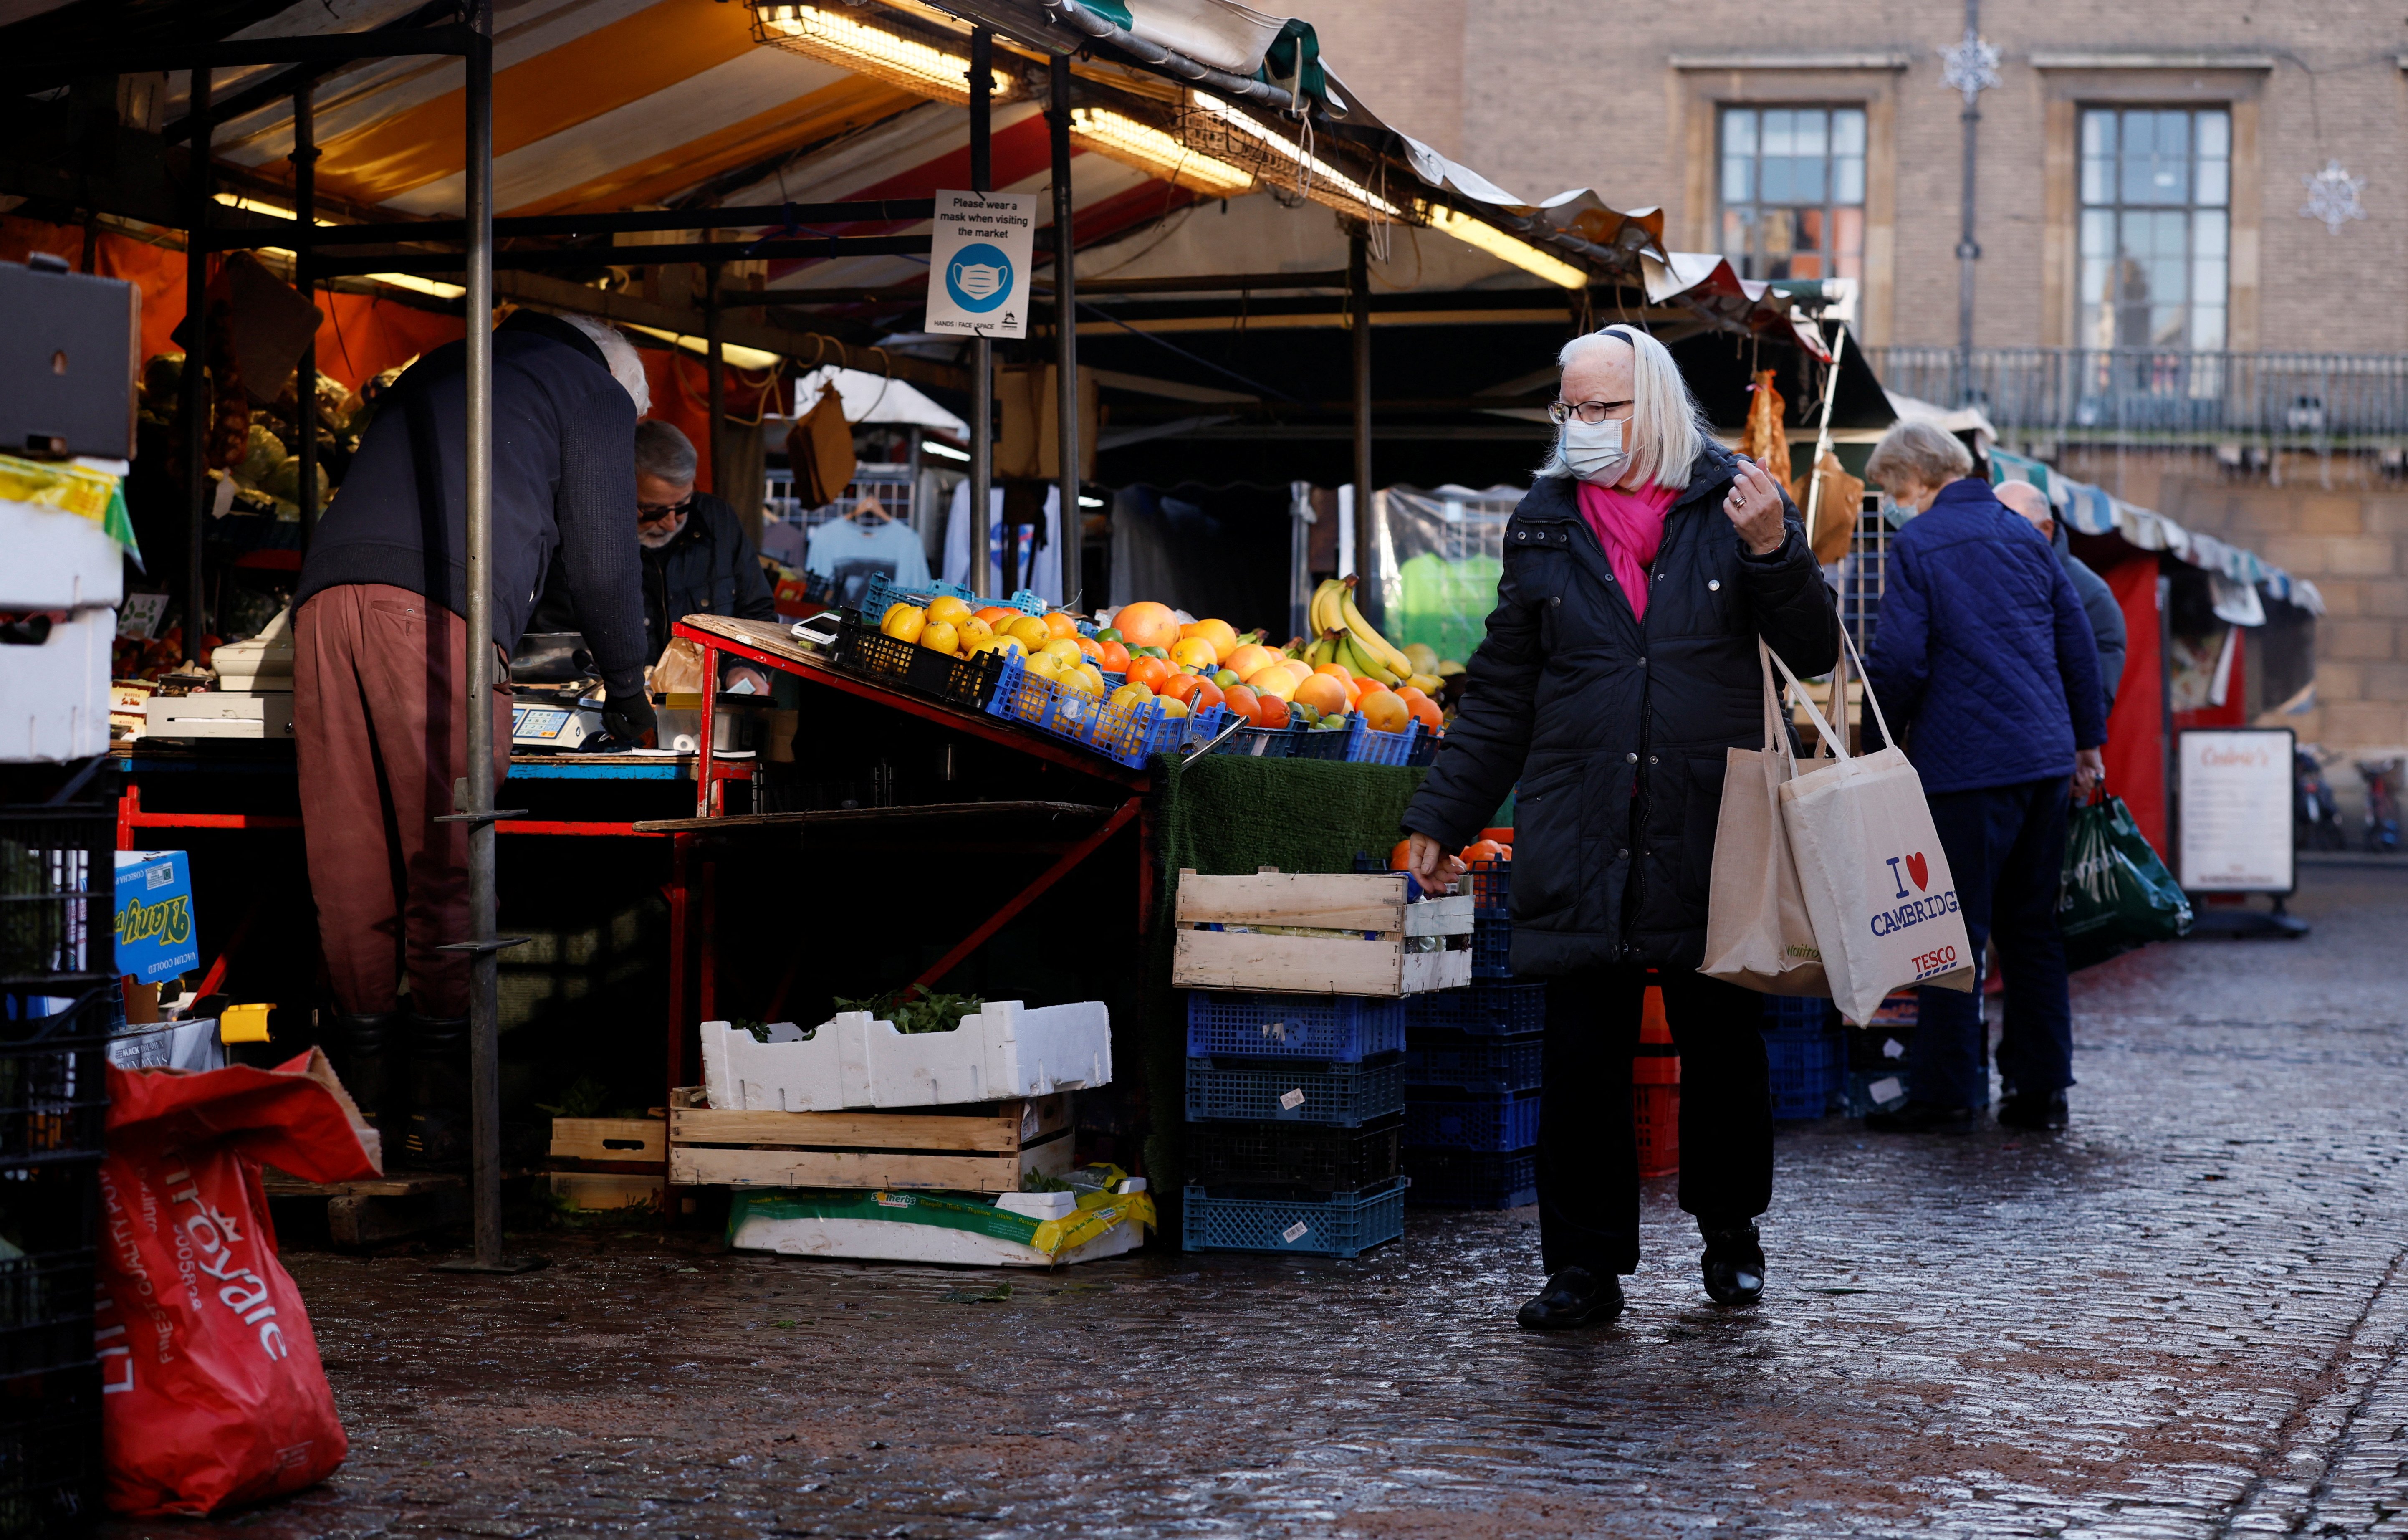 A woman wearing a face mask shops in Cambridge Market Square, amid the coronavirus disease (COVID-19) outbreak